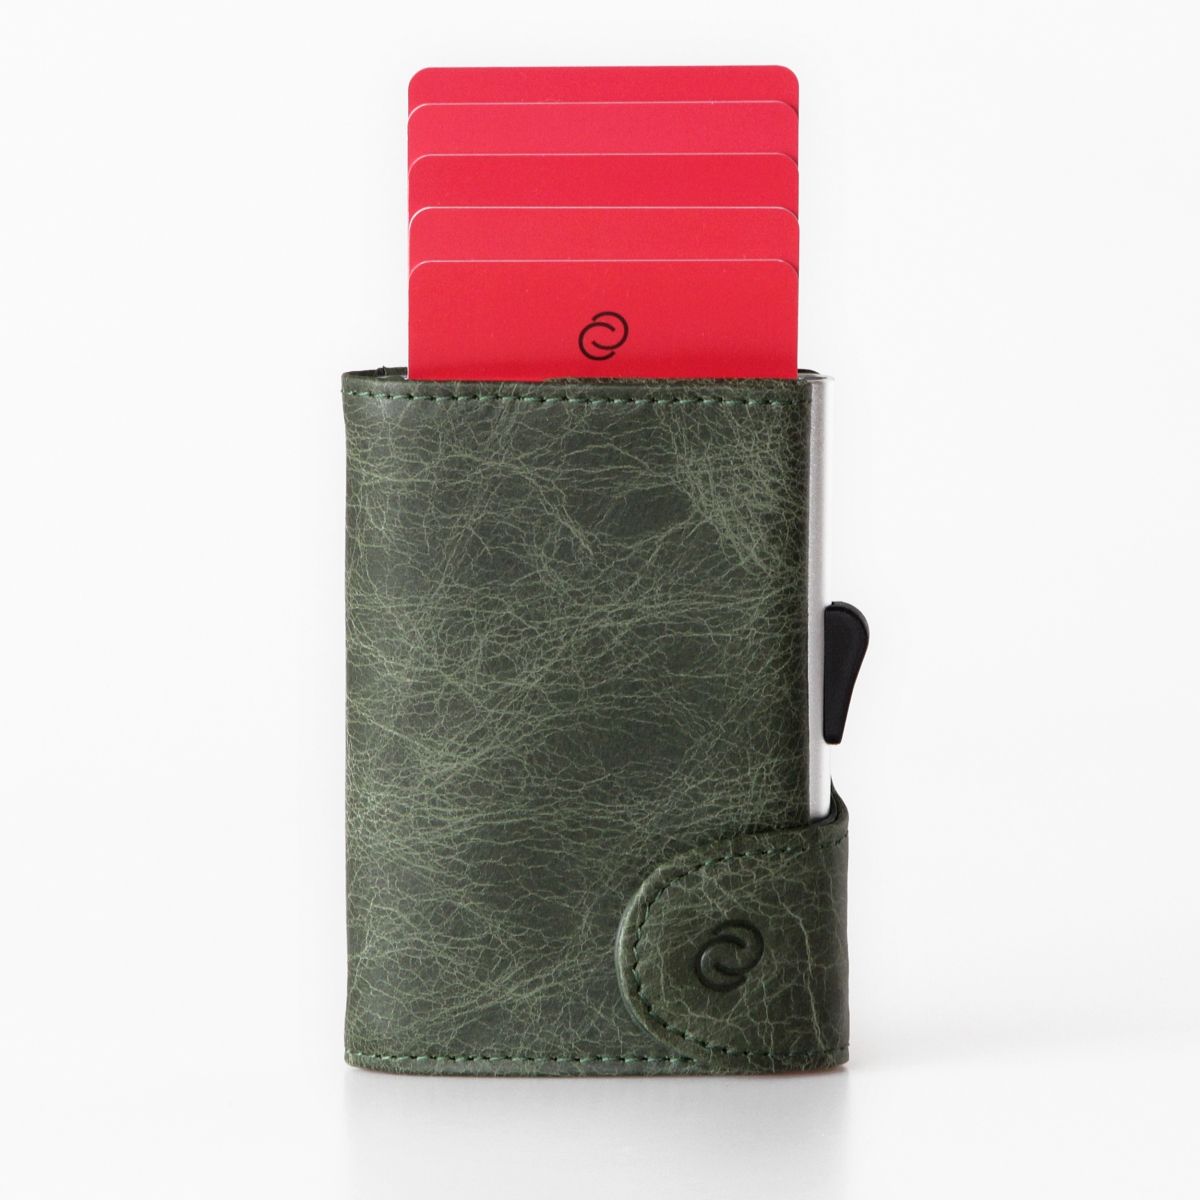 C-Secure Aluminum Card Holder with Genuine Leather - Green